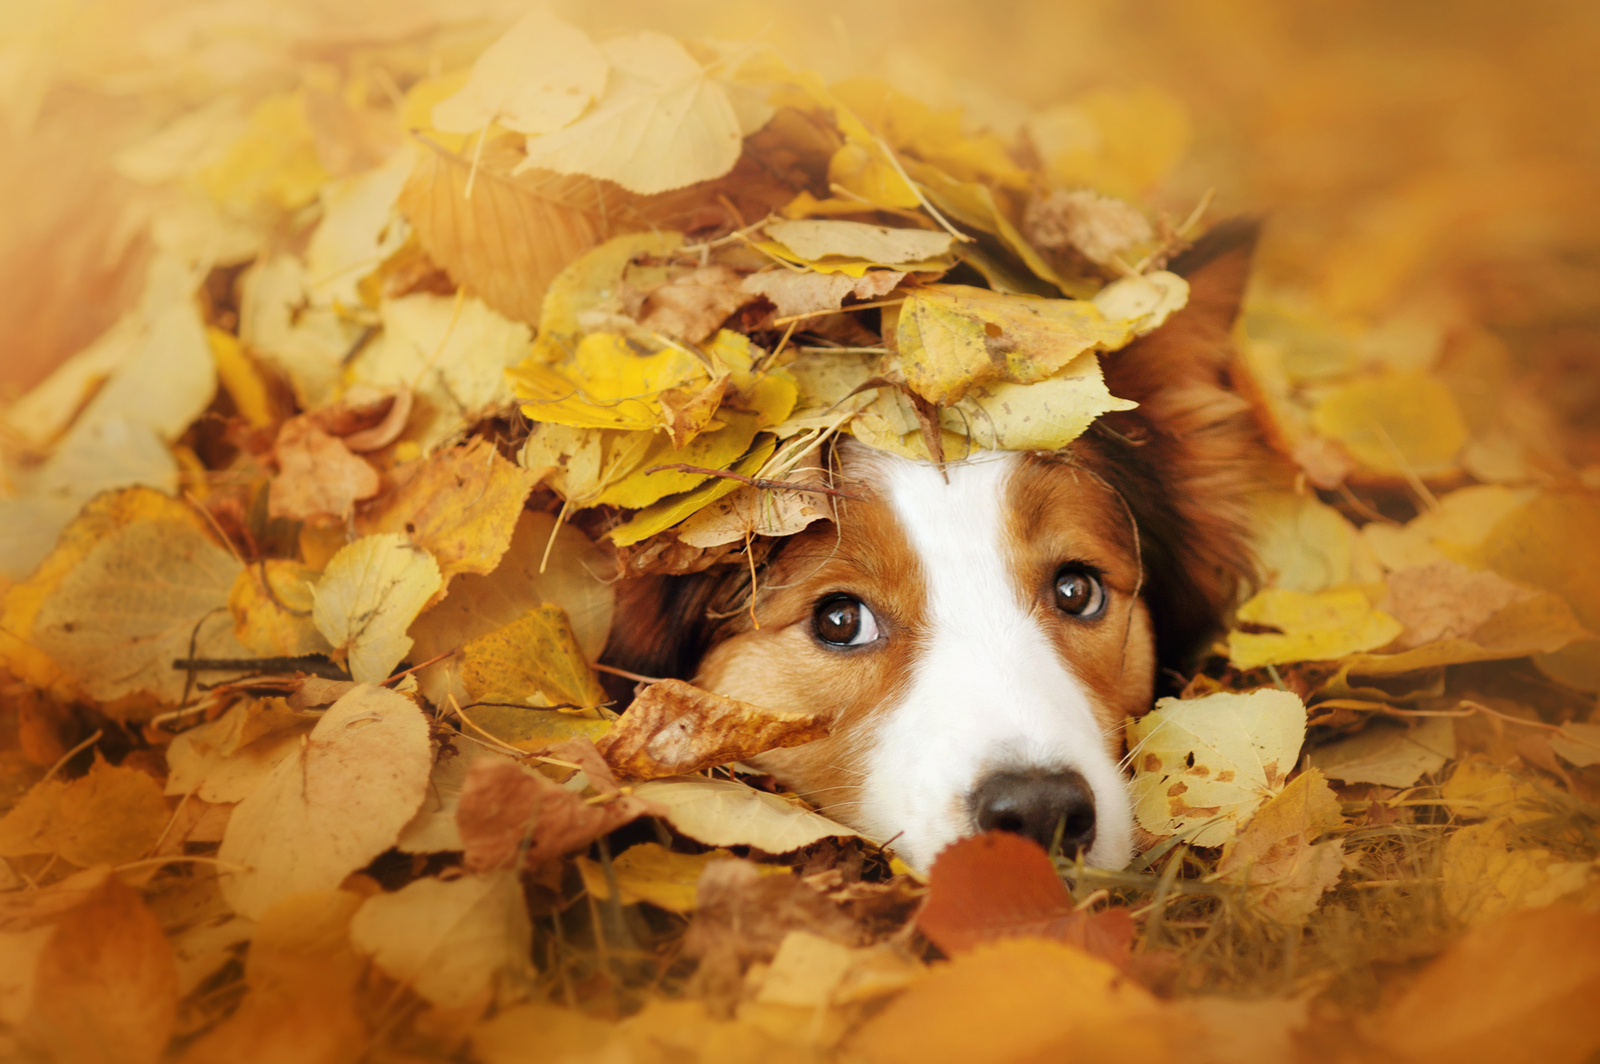 young red border collie dog playing with leaves in autumn